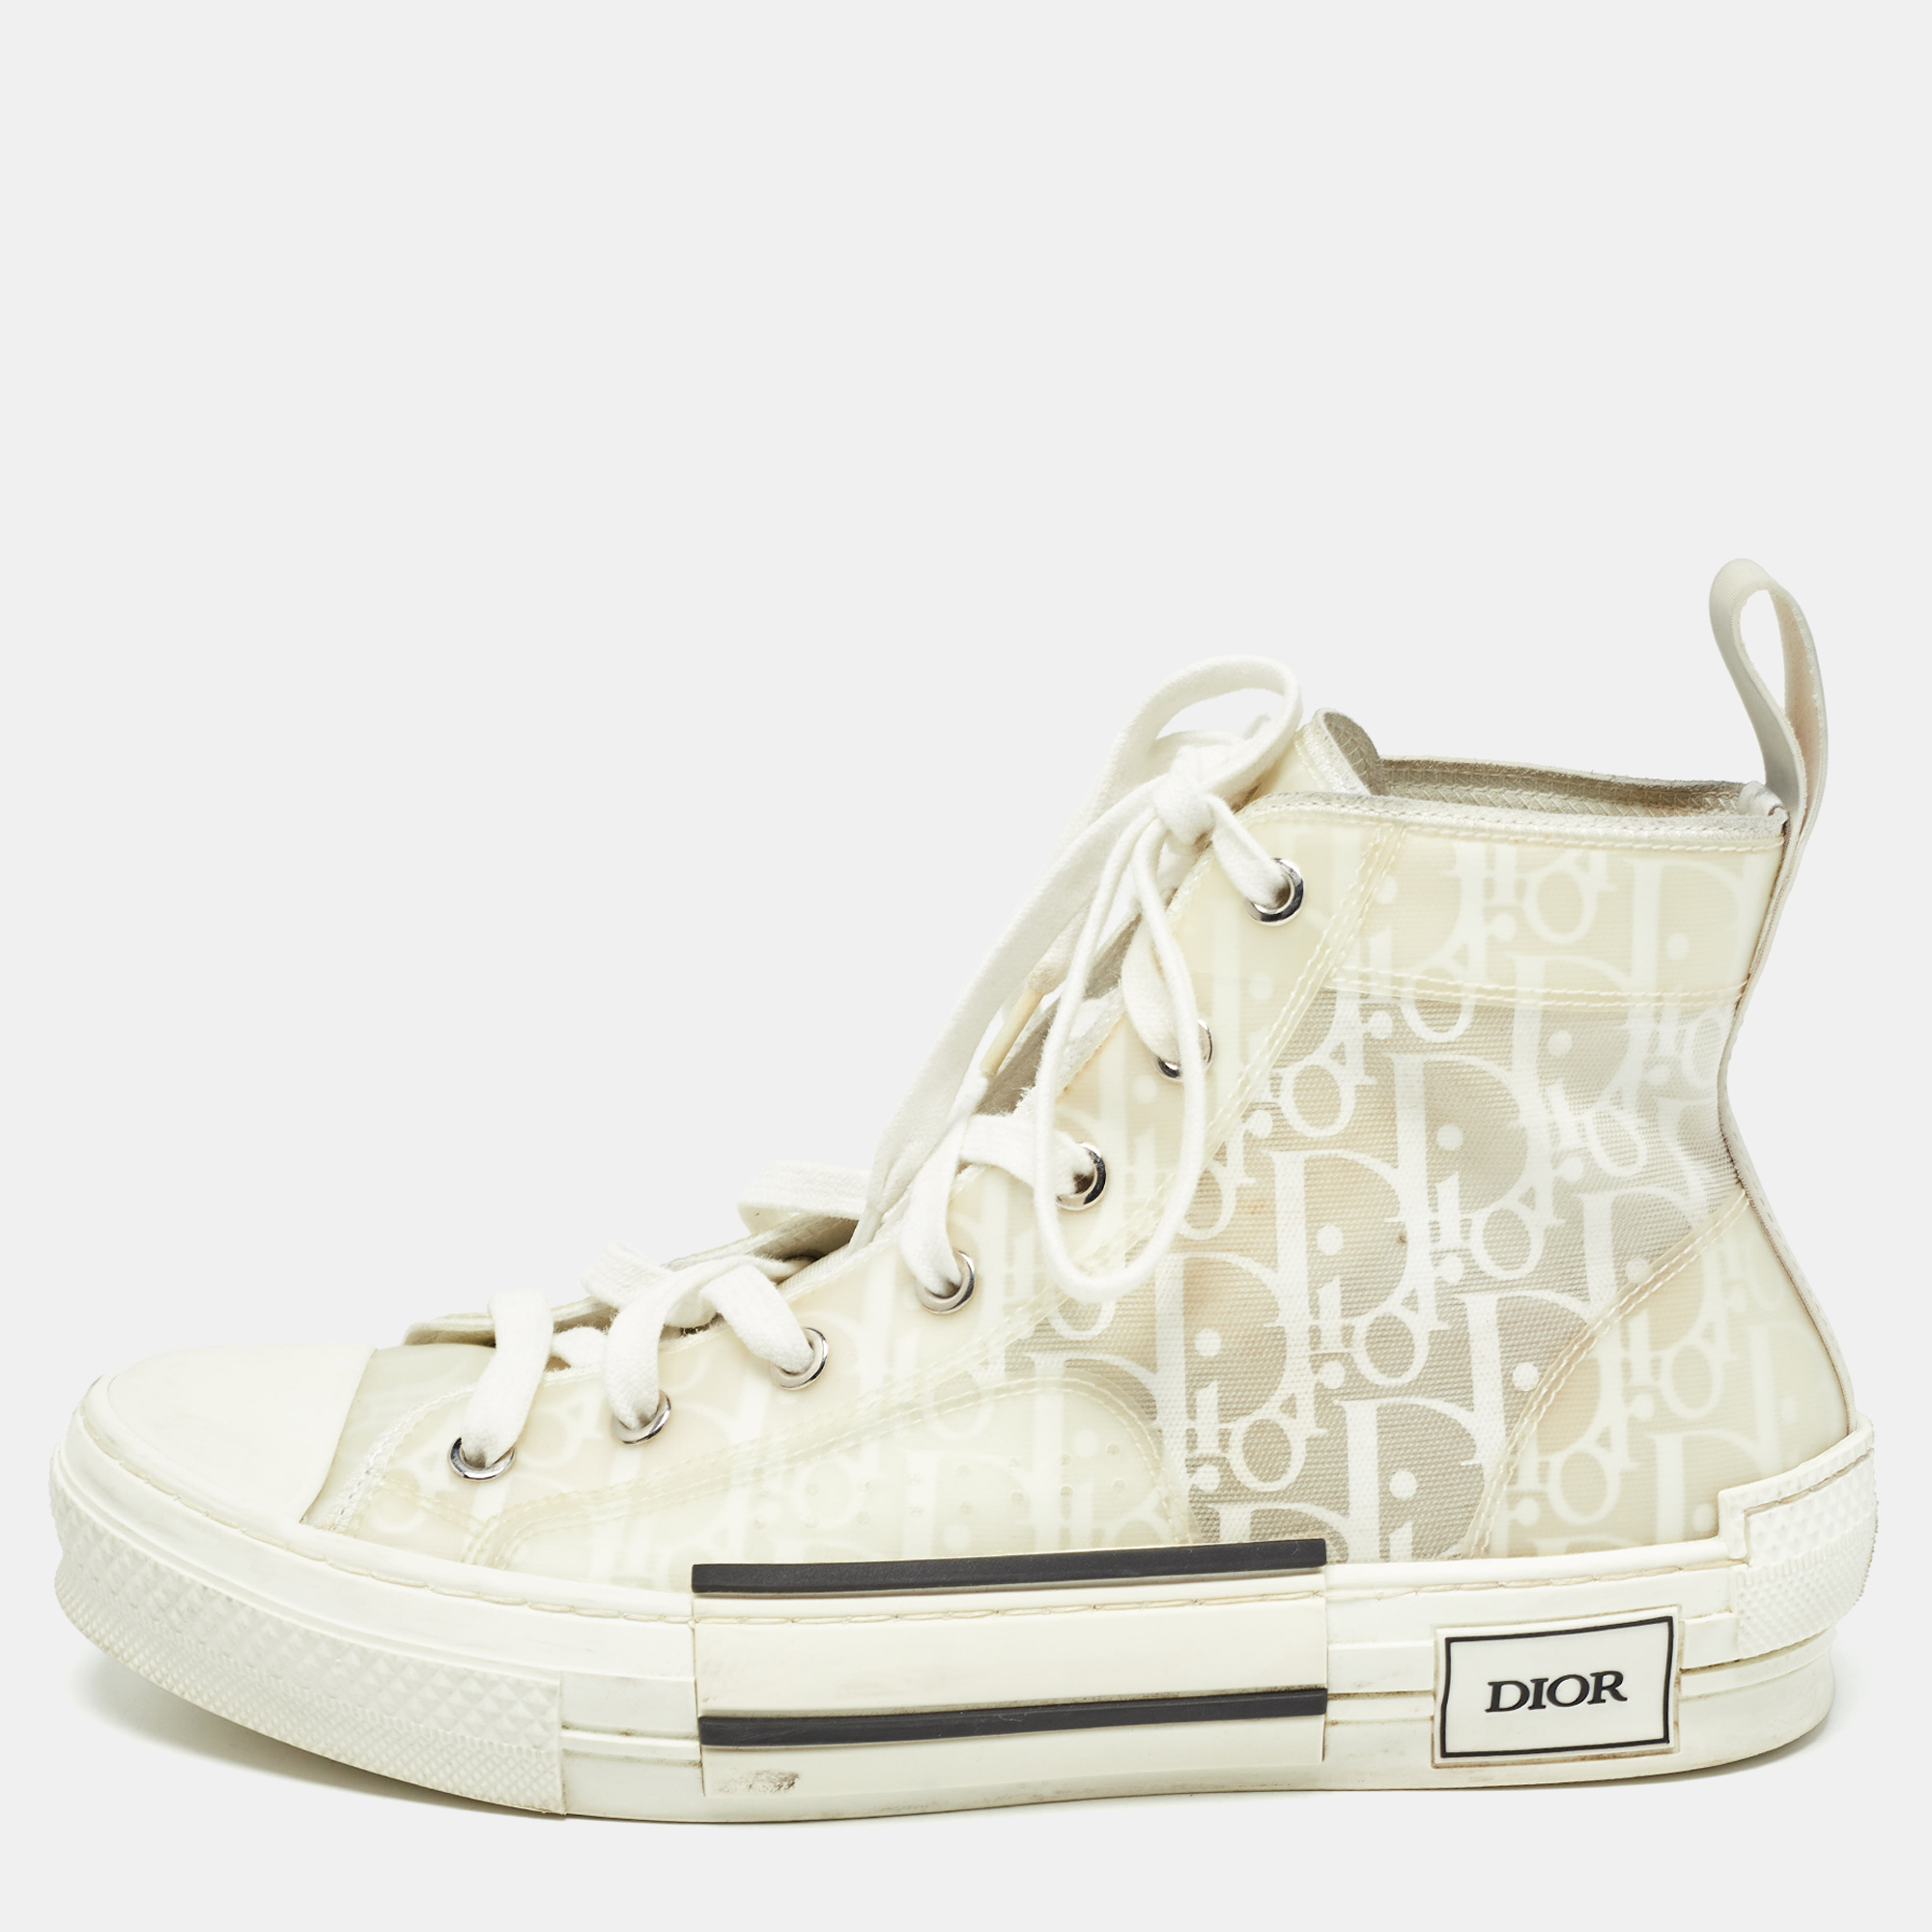 Dior white mesh and rubber b23 high top sneakers size 39